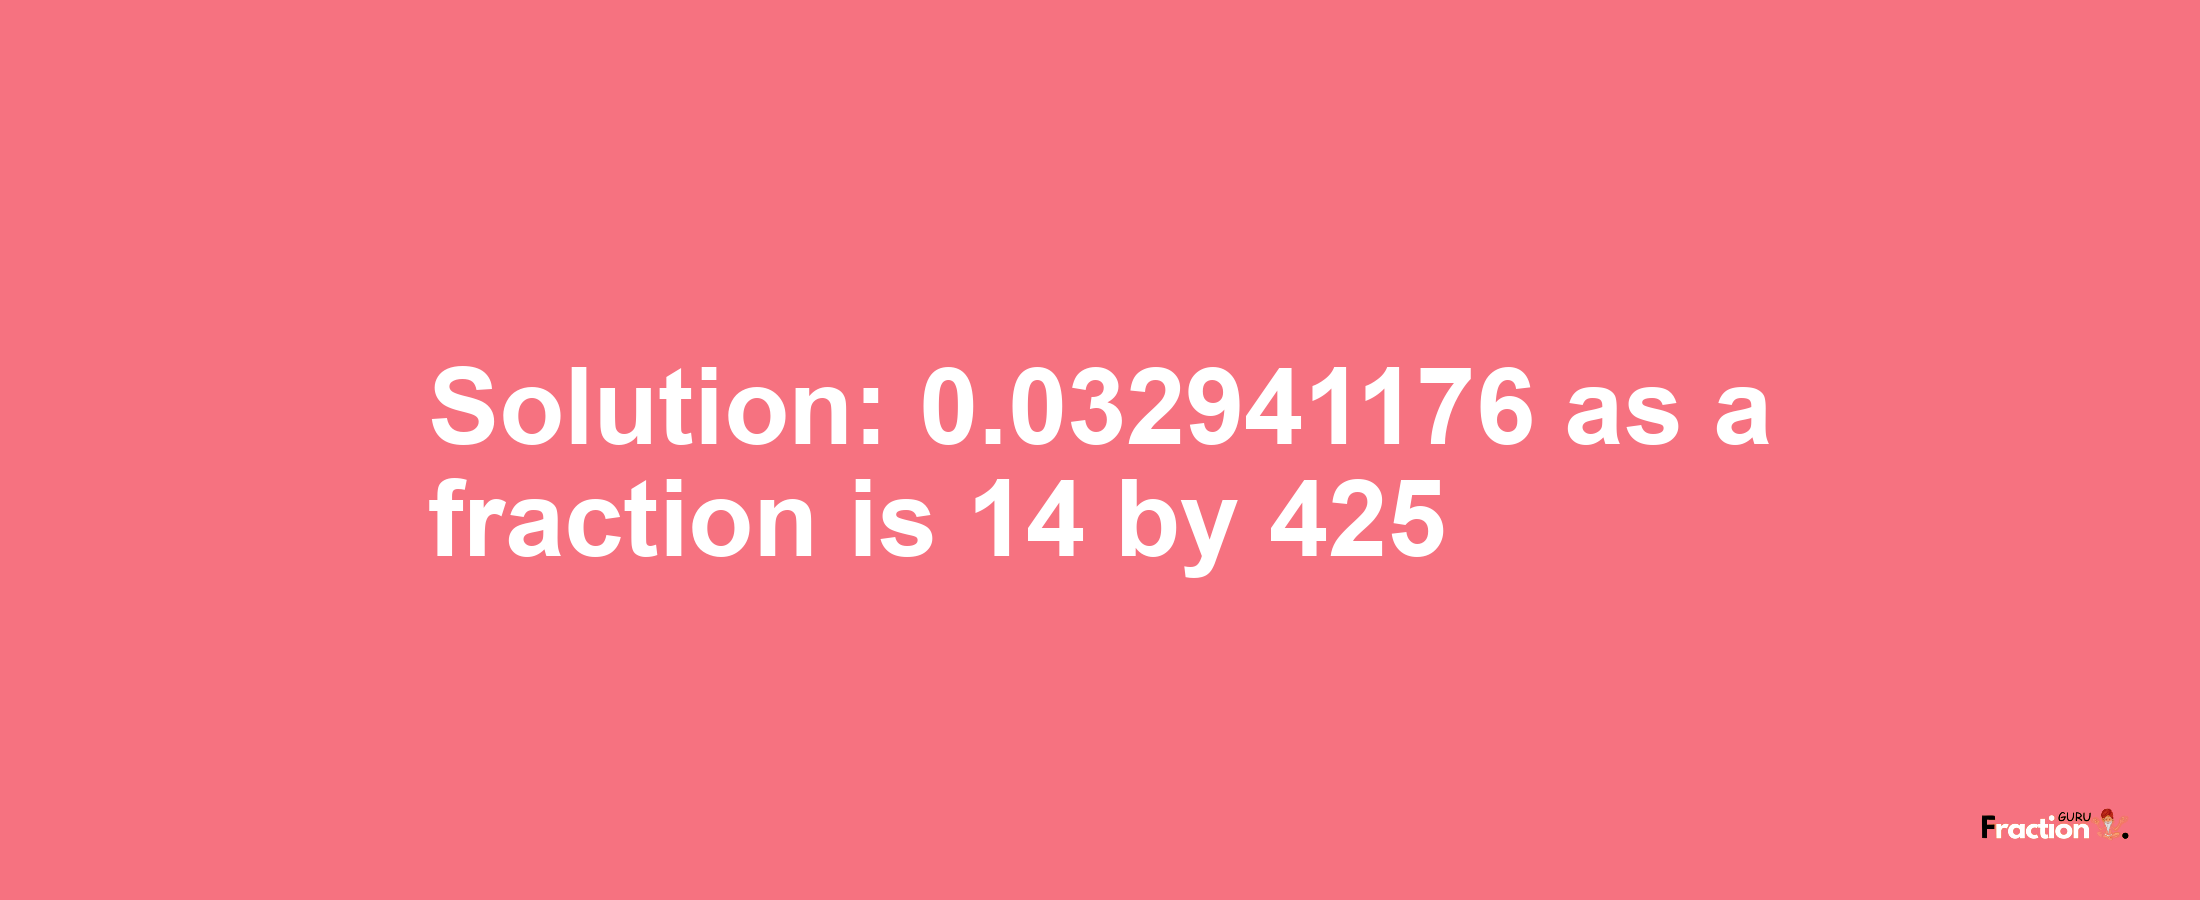 Solution:0.032941176 as a fraction is 14/425